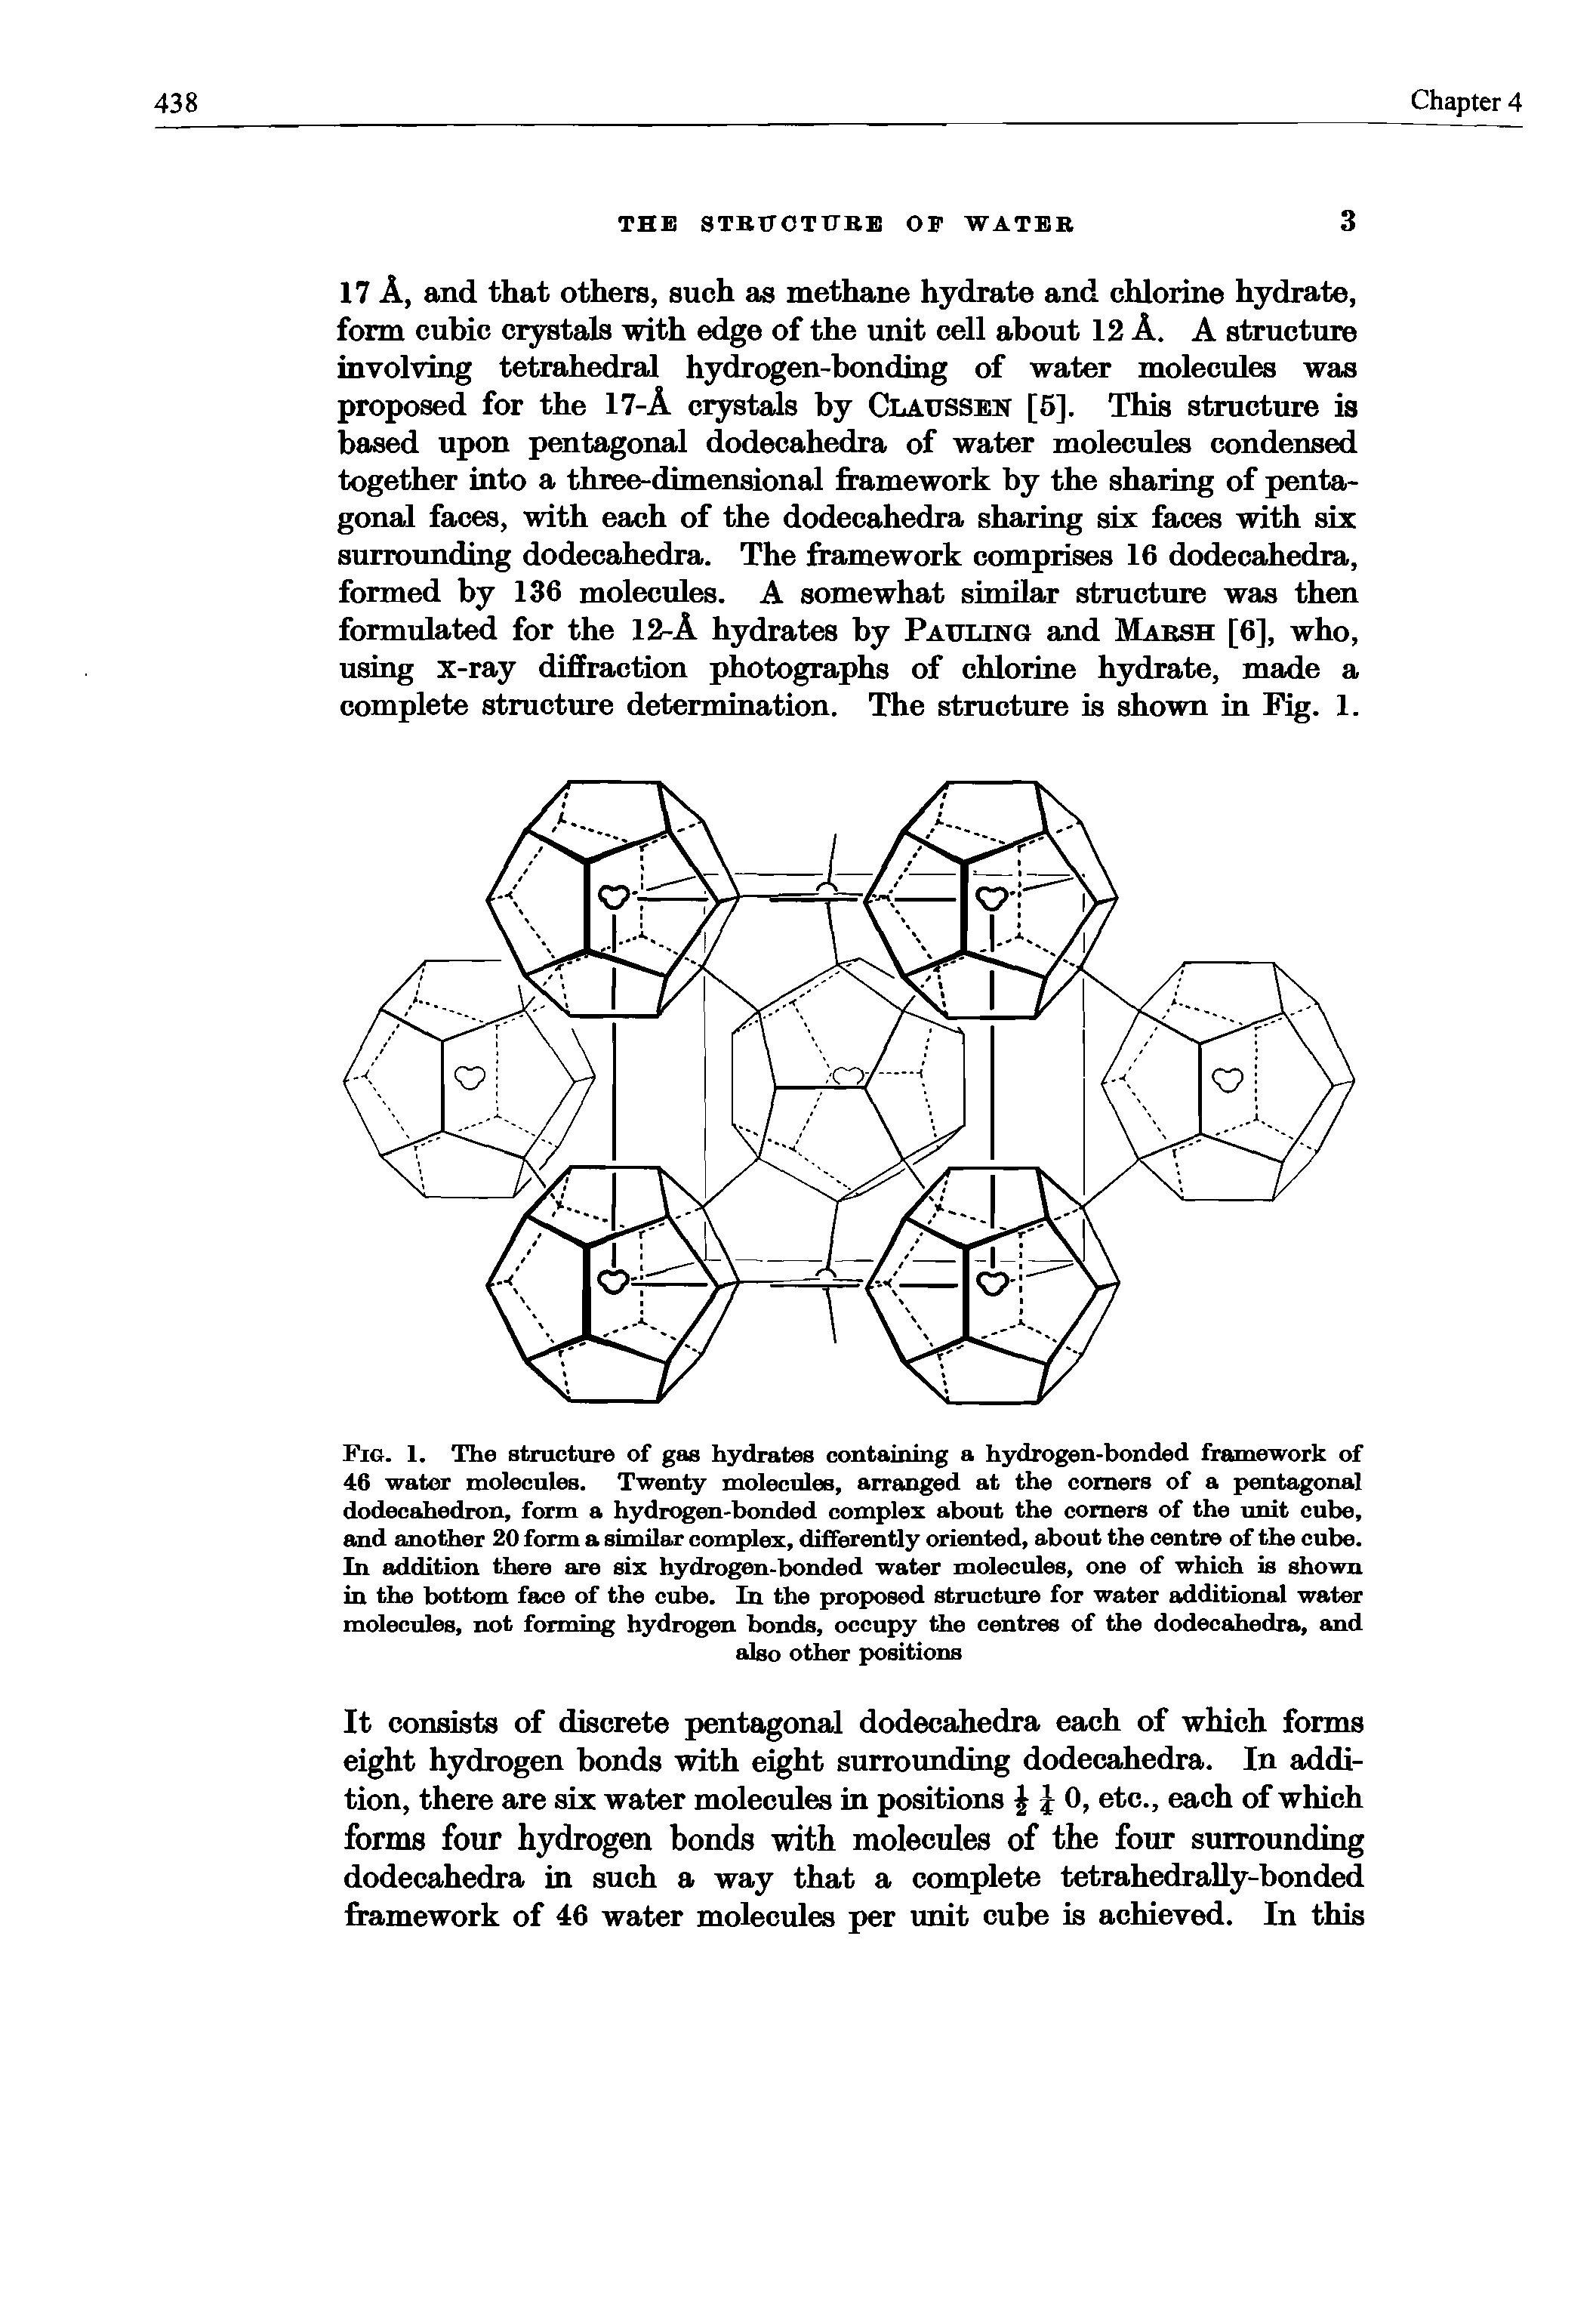 Fig. 1. The structure of gas hydrates containing a hydrogen-bonded framework of 46 water molecules. Twenty molecules, arranged at the comers of a pentagonal dodecahedron, form a hydrogen-bonded complex about the comers of the unit cube, and another 20 form a similar complex, differently oriented, about the centre of the cube. In addition there are six hydrogen-bonded water molecules, one of which is shown in the bottom face of the cube. In the proposed structure for water additional water molecules, not forming hydrogen bonds, occupy the centres of the dodecahedra, and...